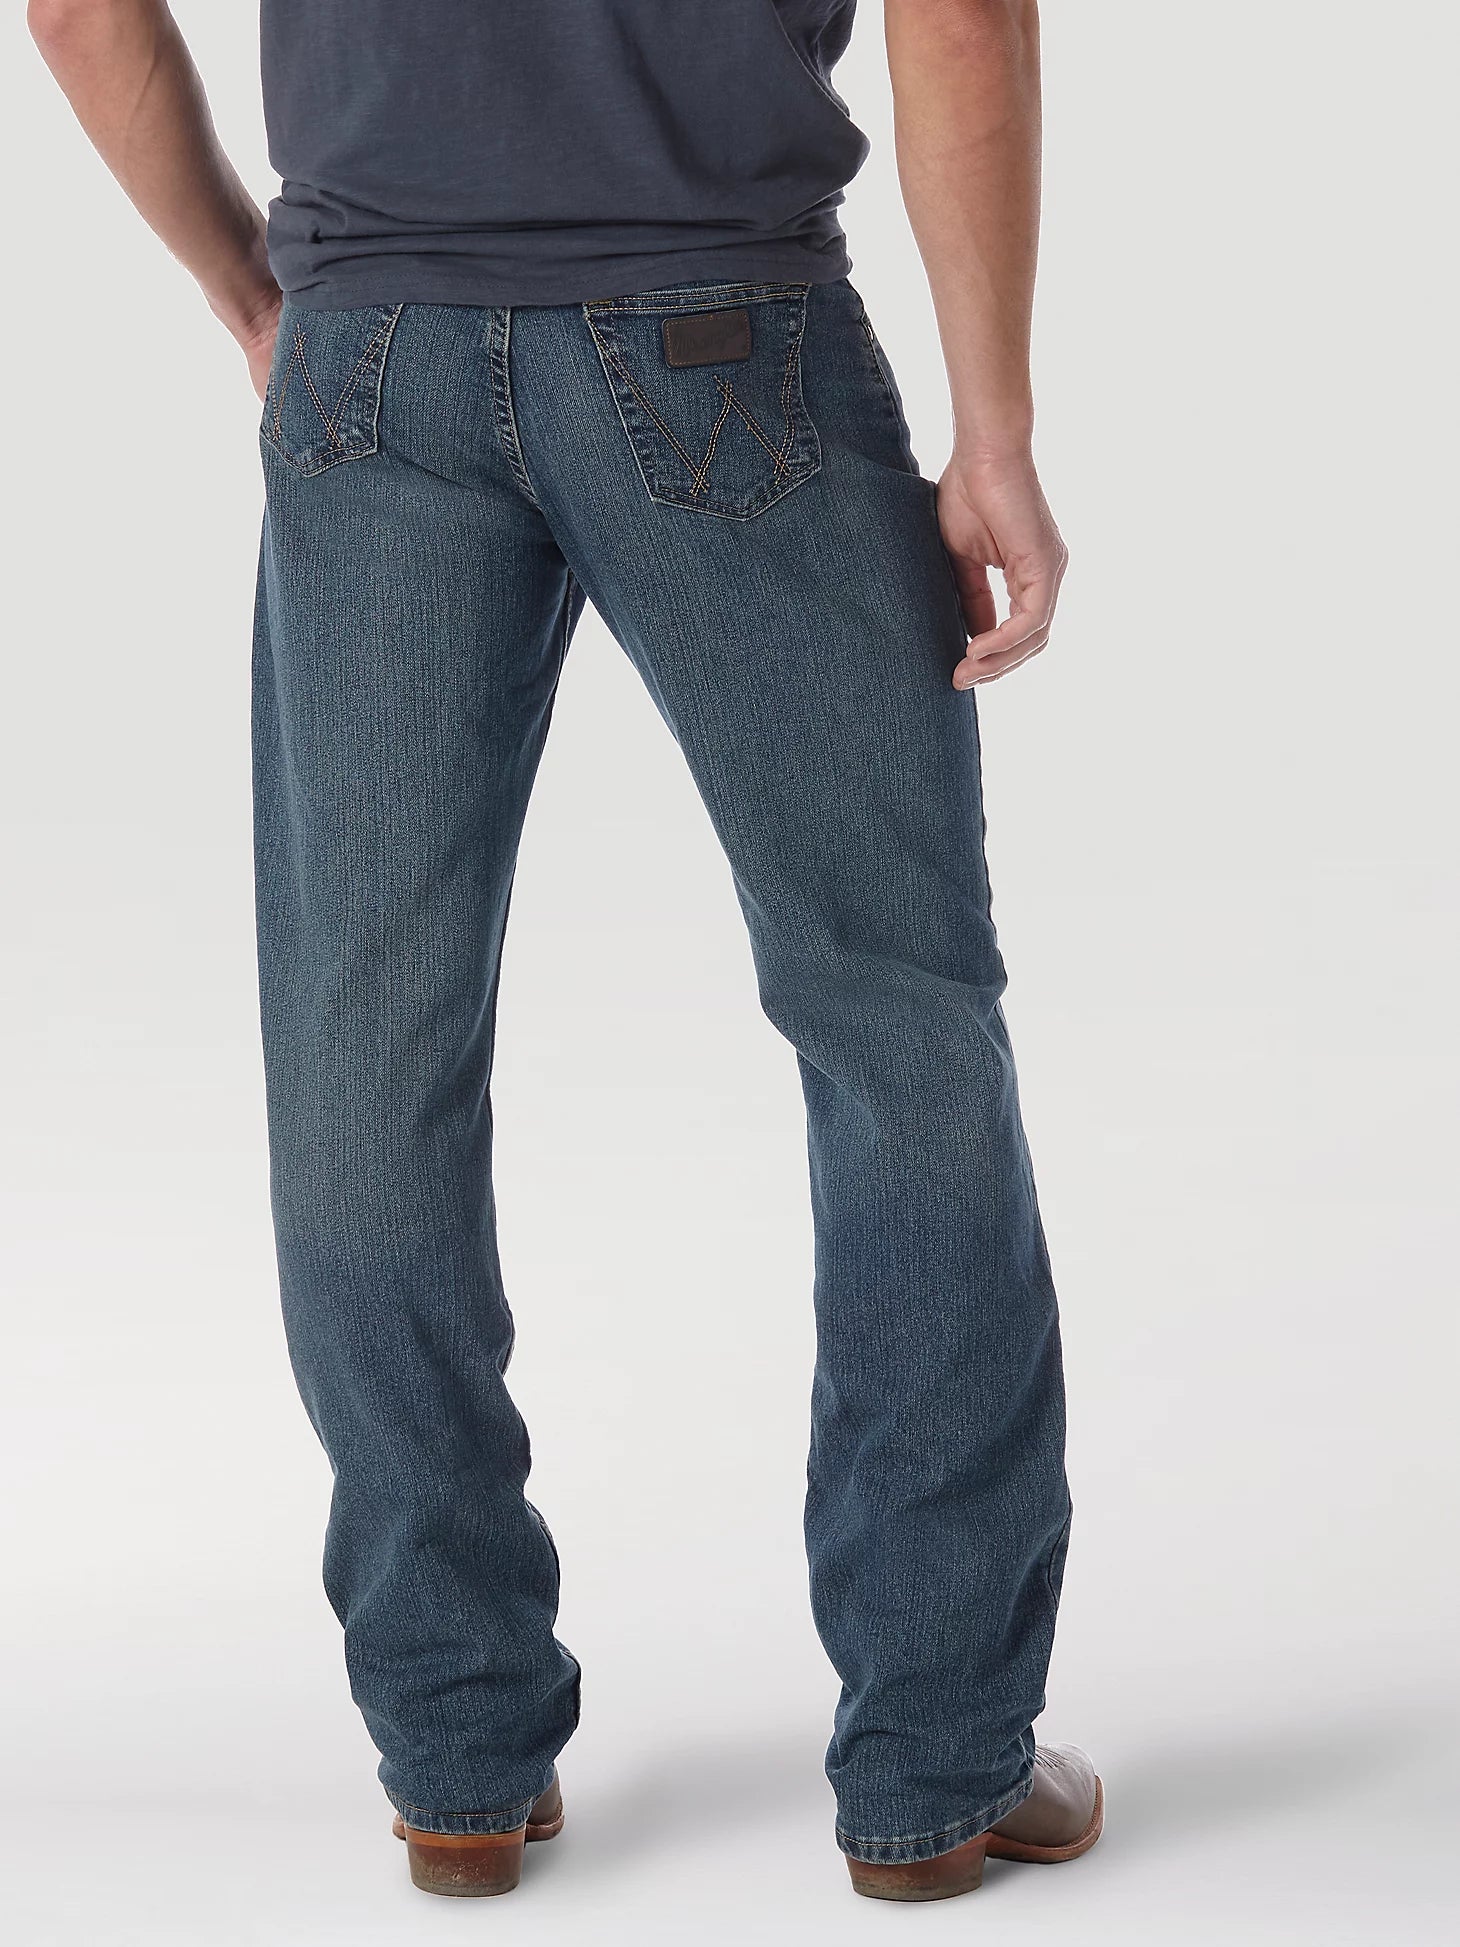 WRANGLER® 20X® ADVANCED COMFORT 01 COMPETITION RELAXED JEAN IN BARREL